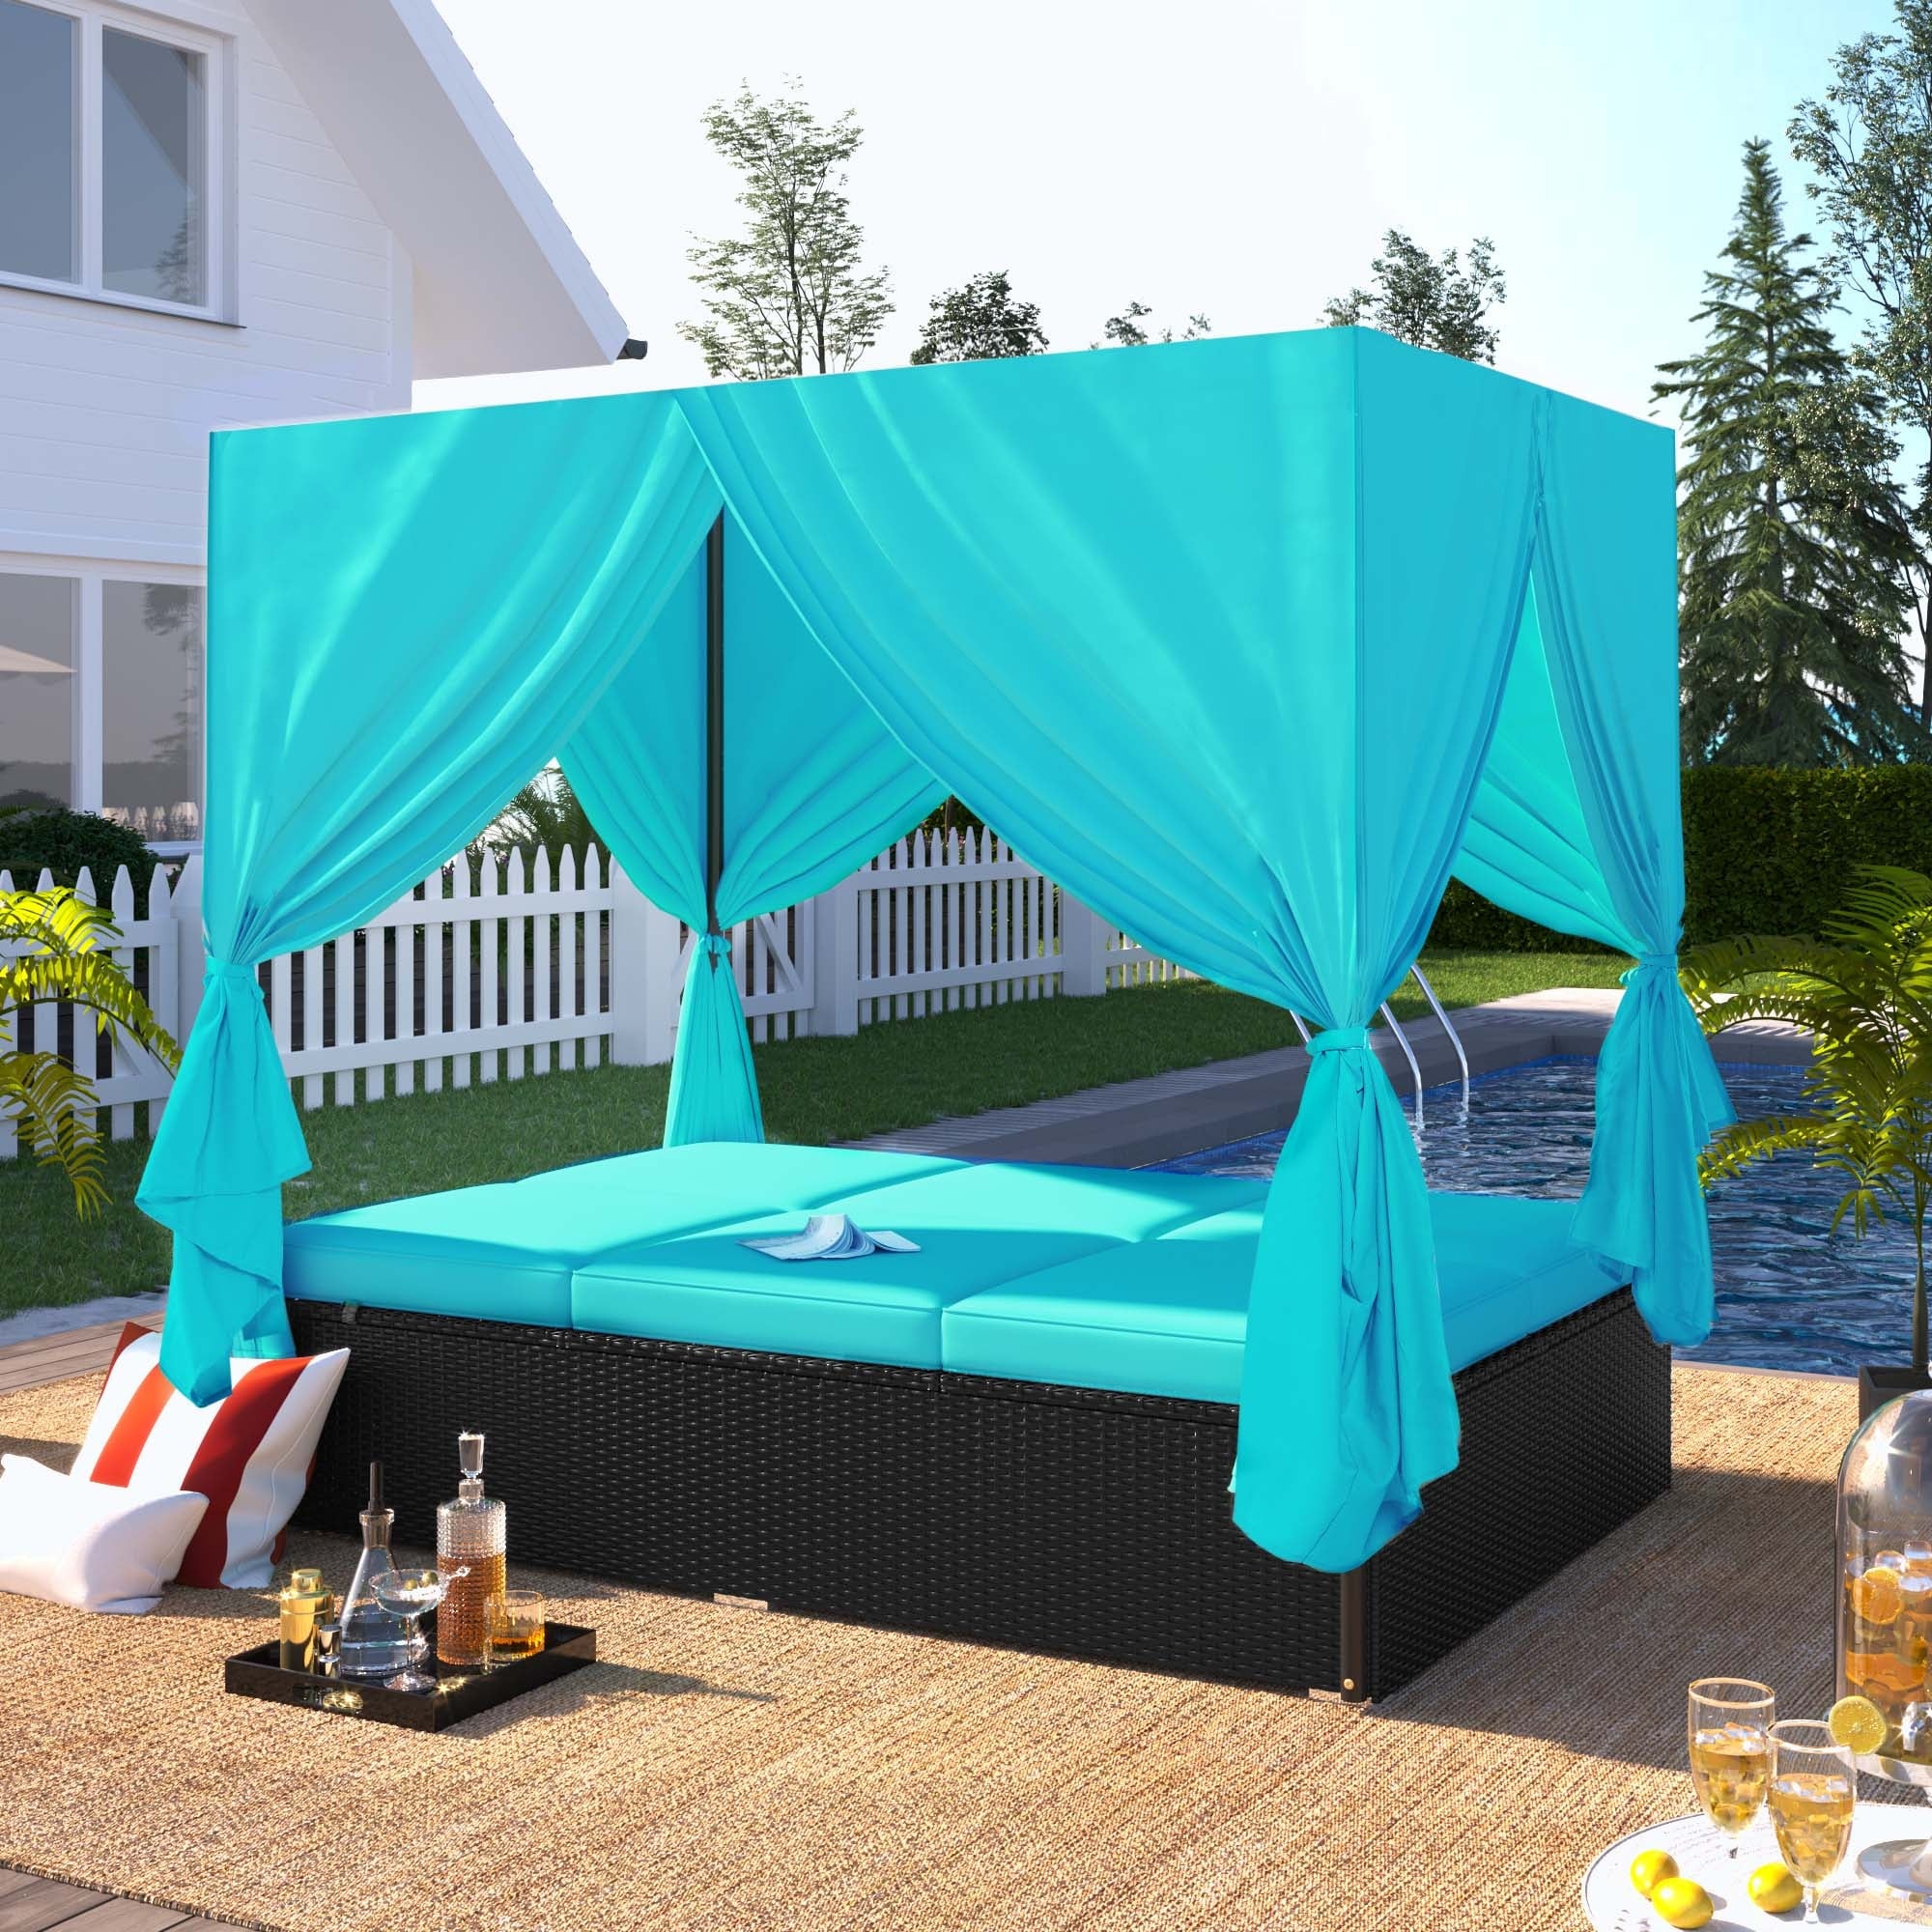 Outdoor Wicker Sunbed Daybed With Cushions adjustable Seats